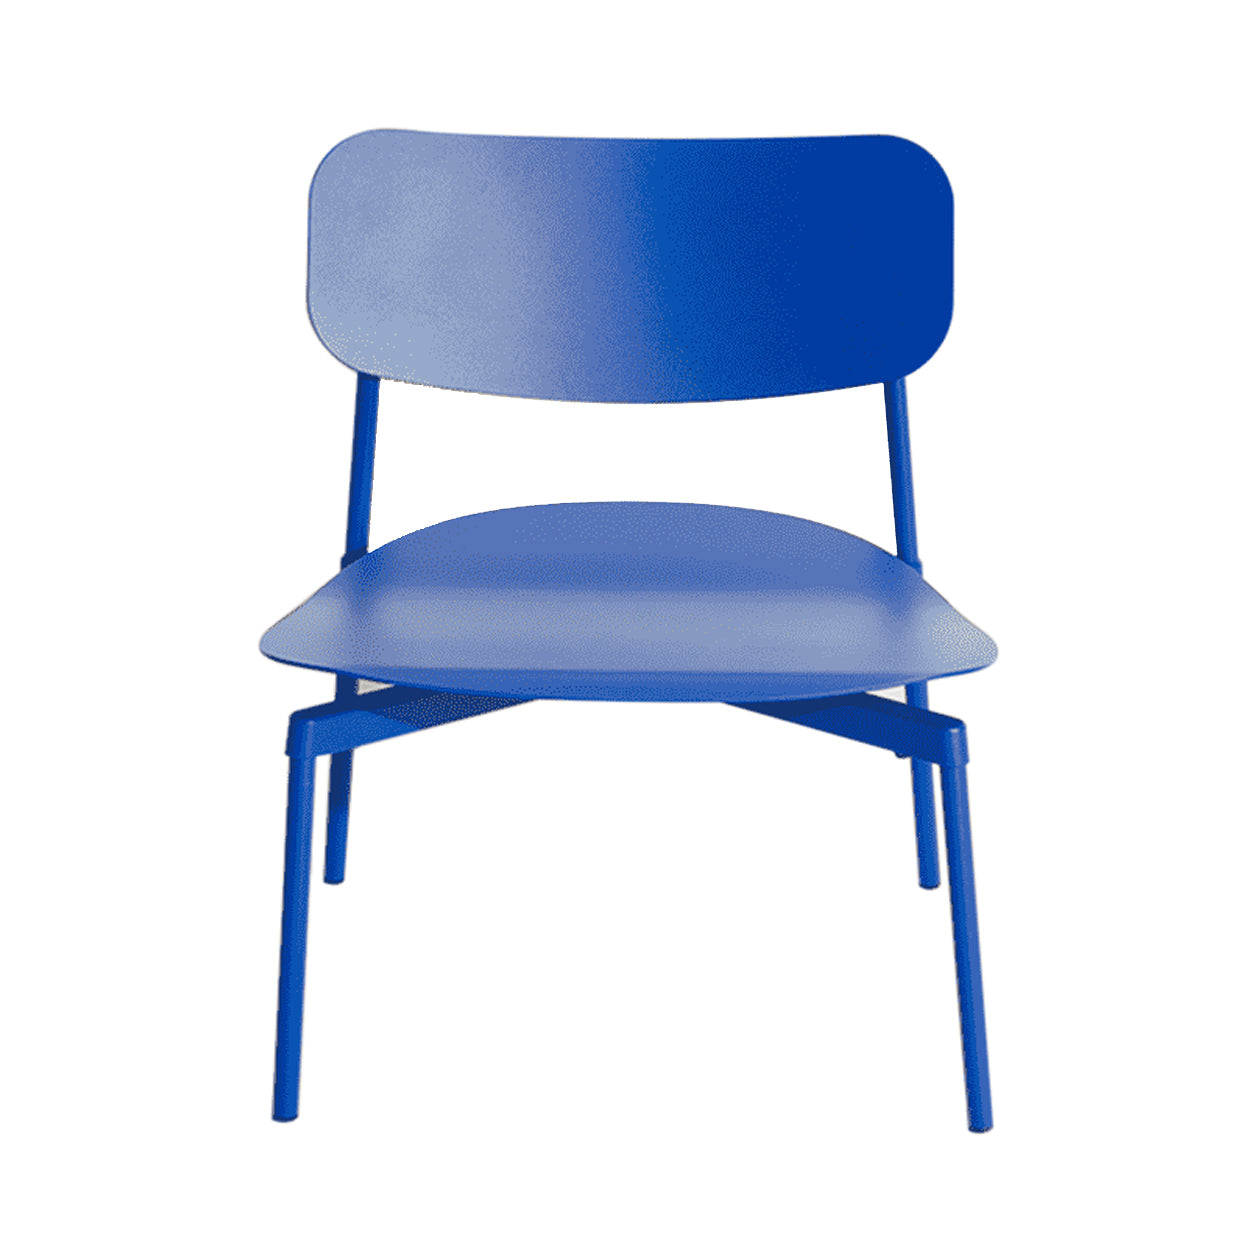 Fromme Lounge Chair: Outdoor + Blue